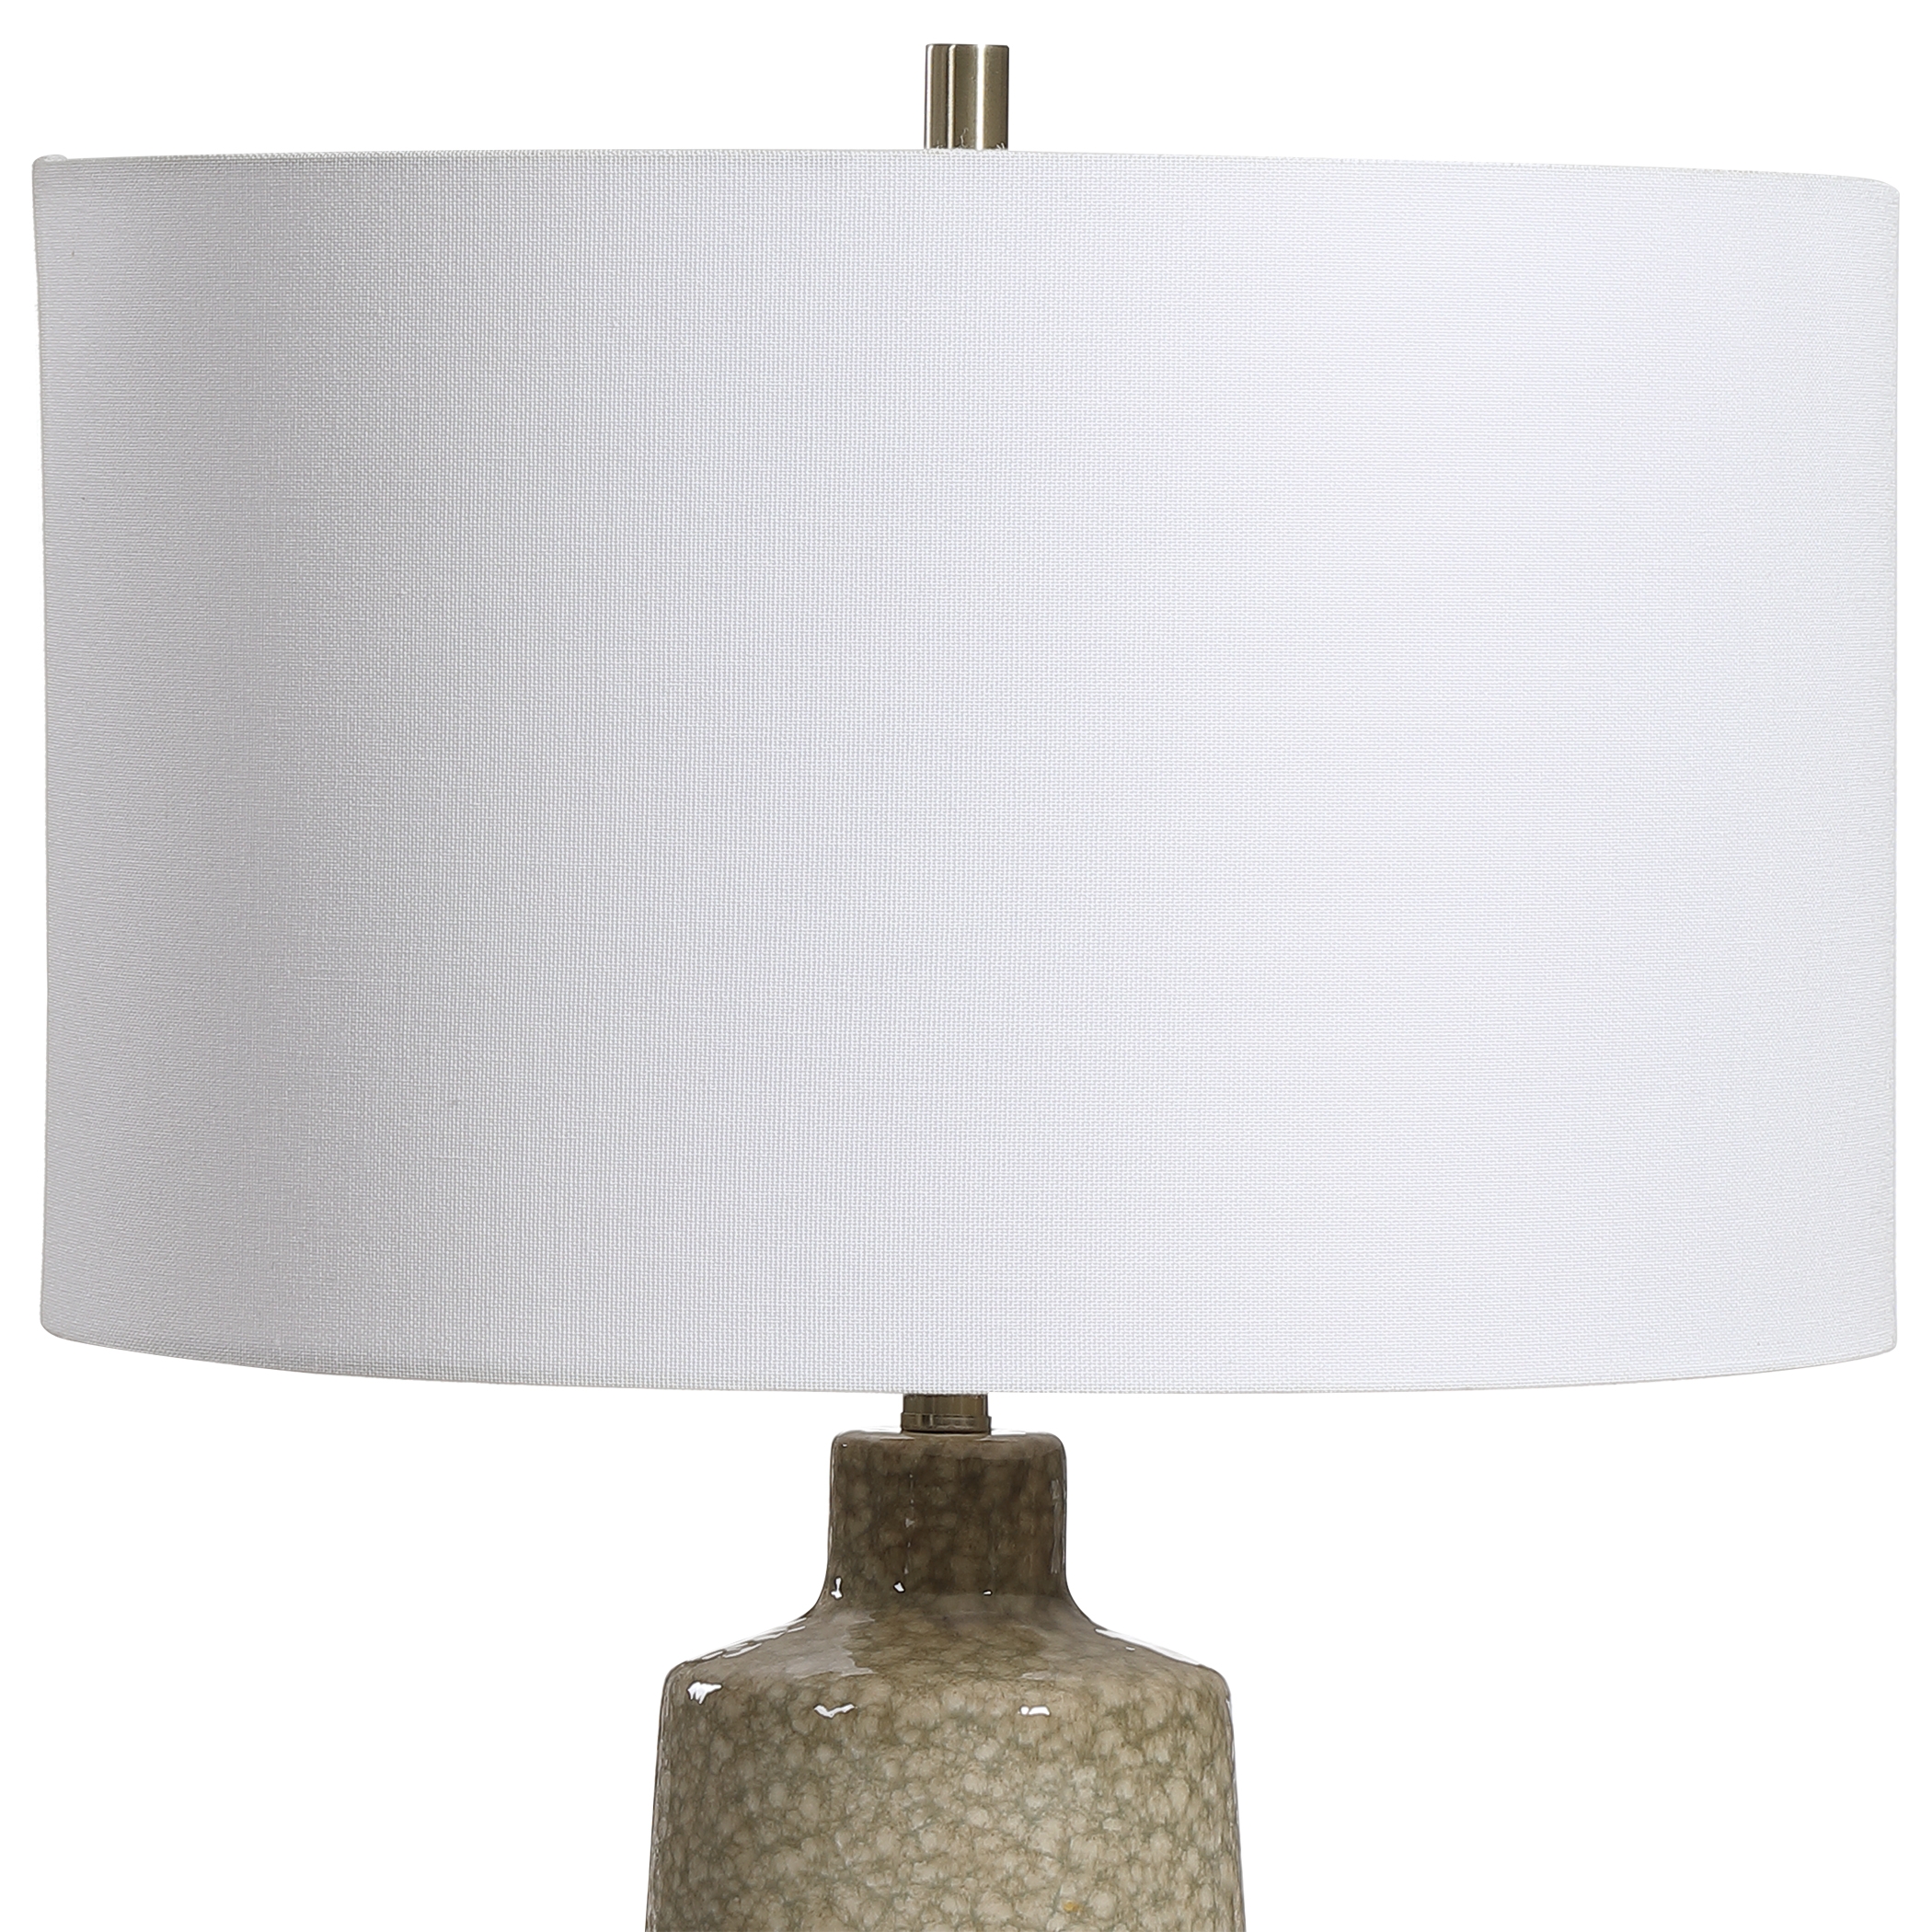 Linnie Sage Green Table Lamp - Image 4